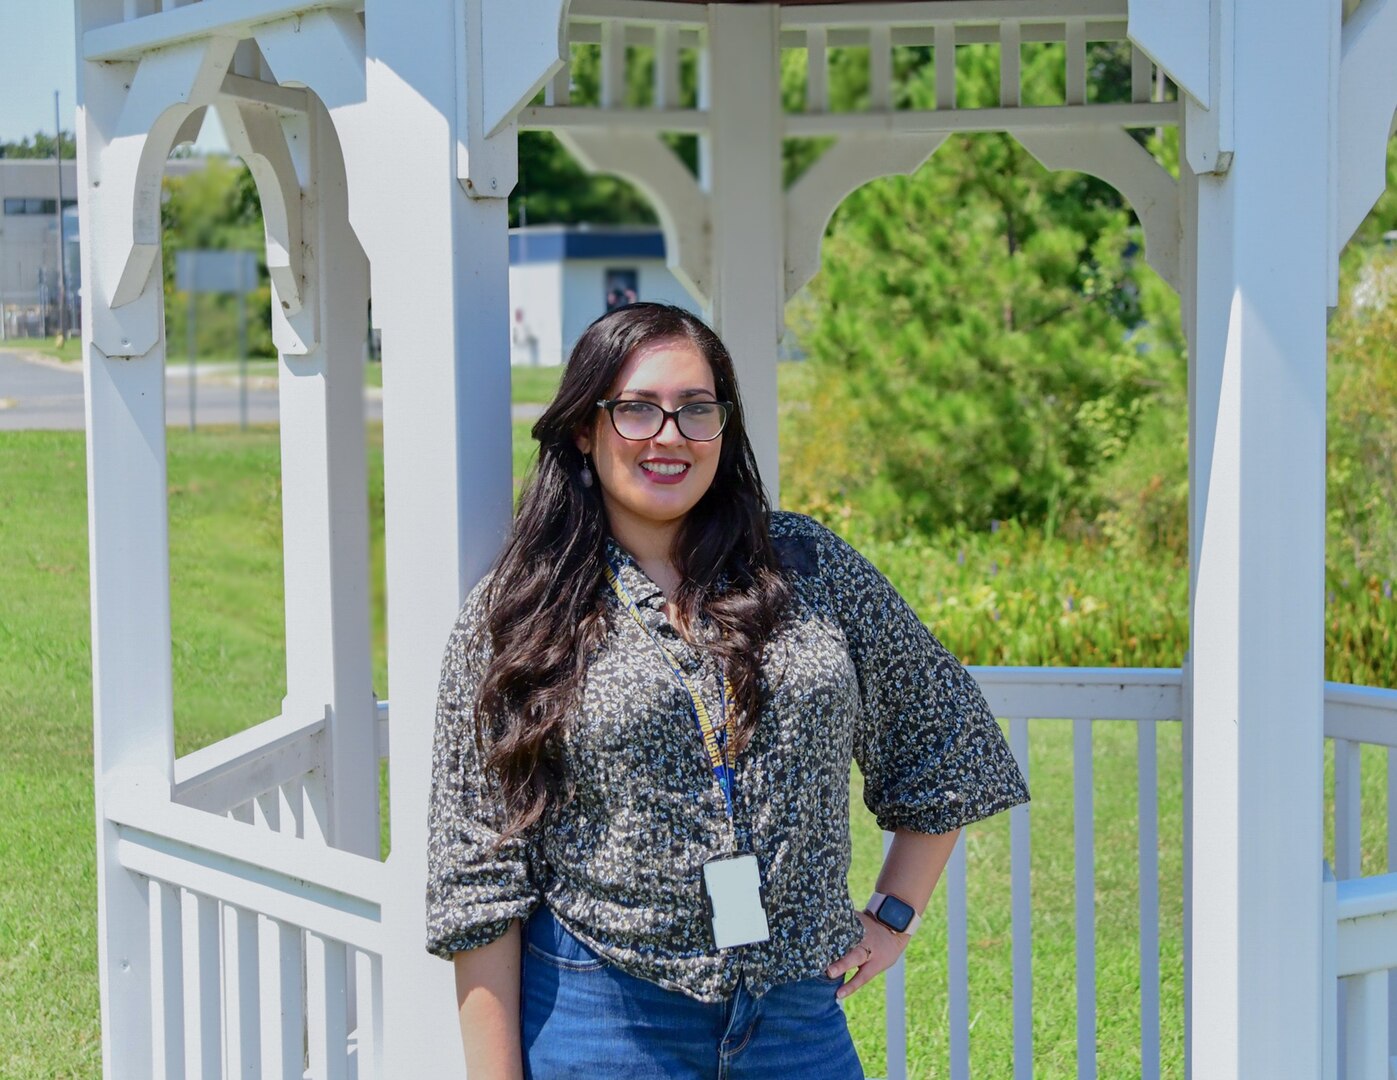 IMAGE: Nohely Miranda-Colon, a native to Puerto Rico and a scientist at the Naval Surface Warfare Center Dahlgren Division is spotlighted for National Hispanic Heritage month. She emphasizes the importance of having diverse scientists and engineers who bring a unique background and understanding to the team.